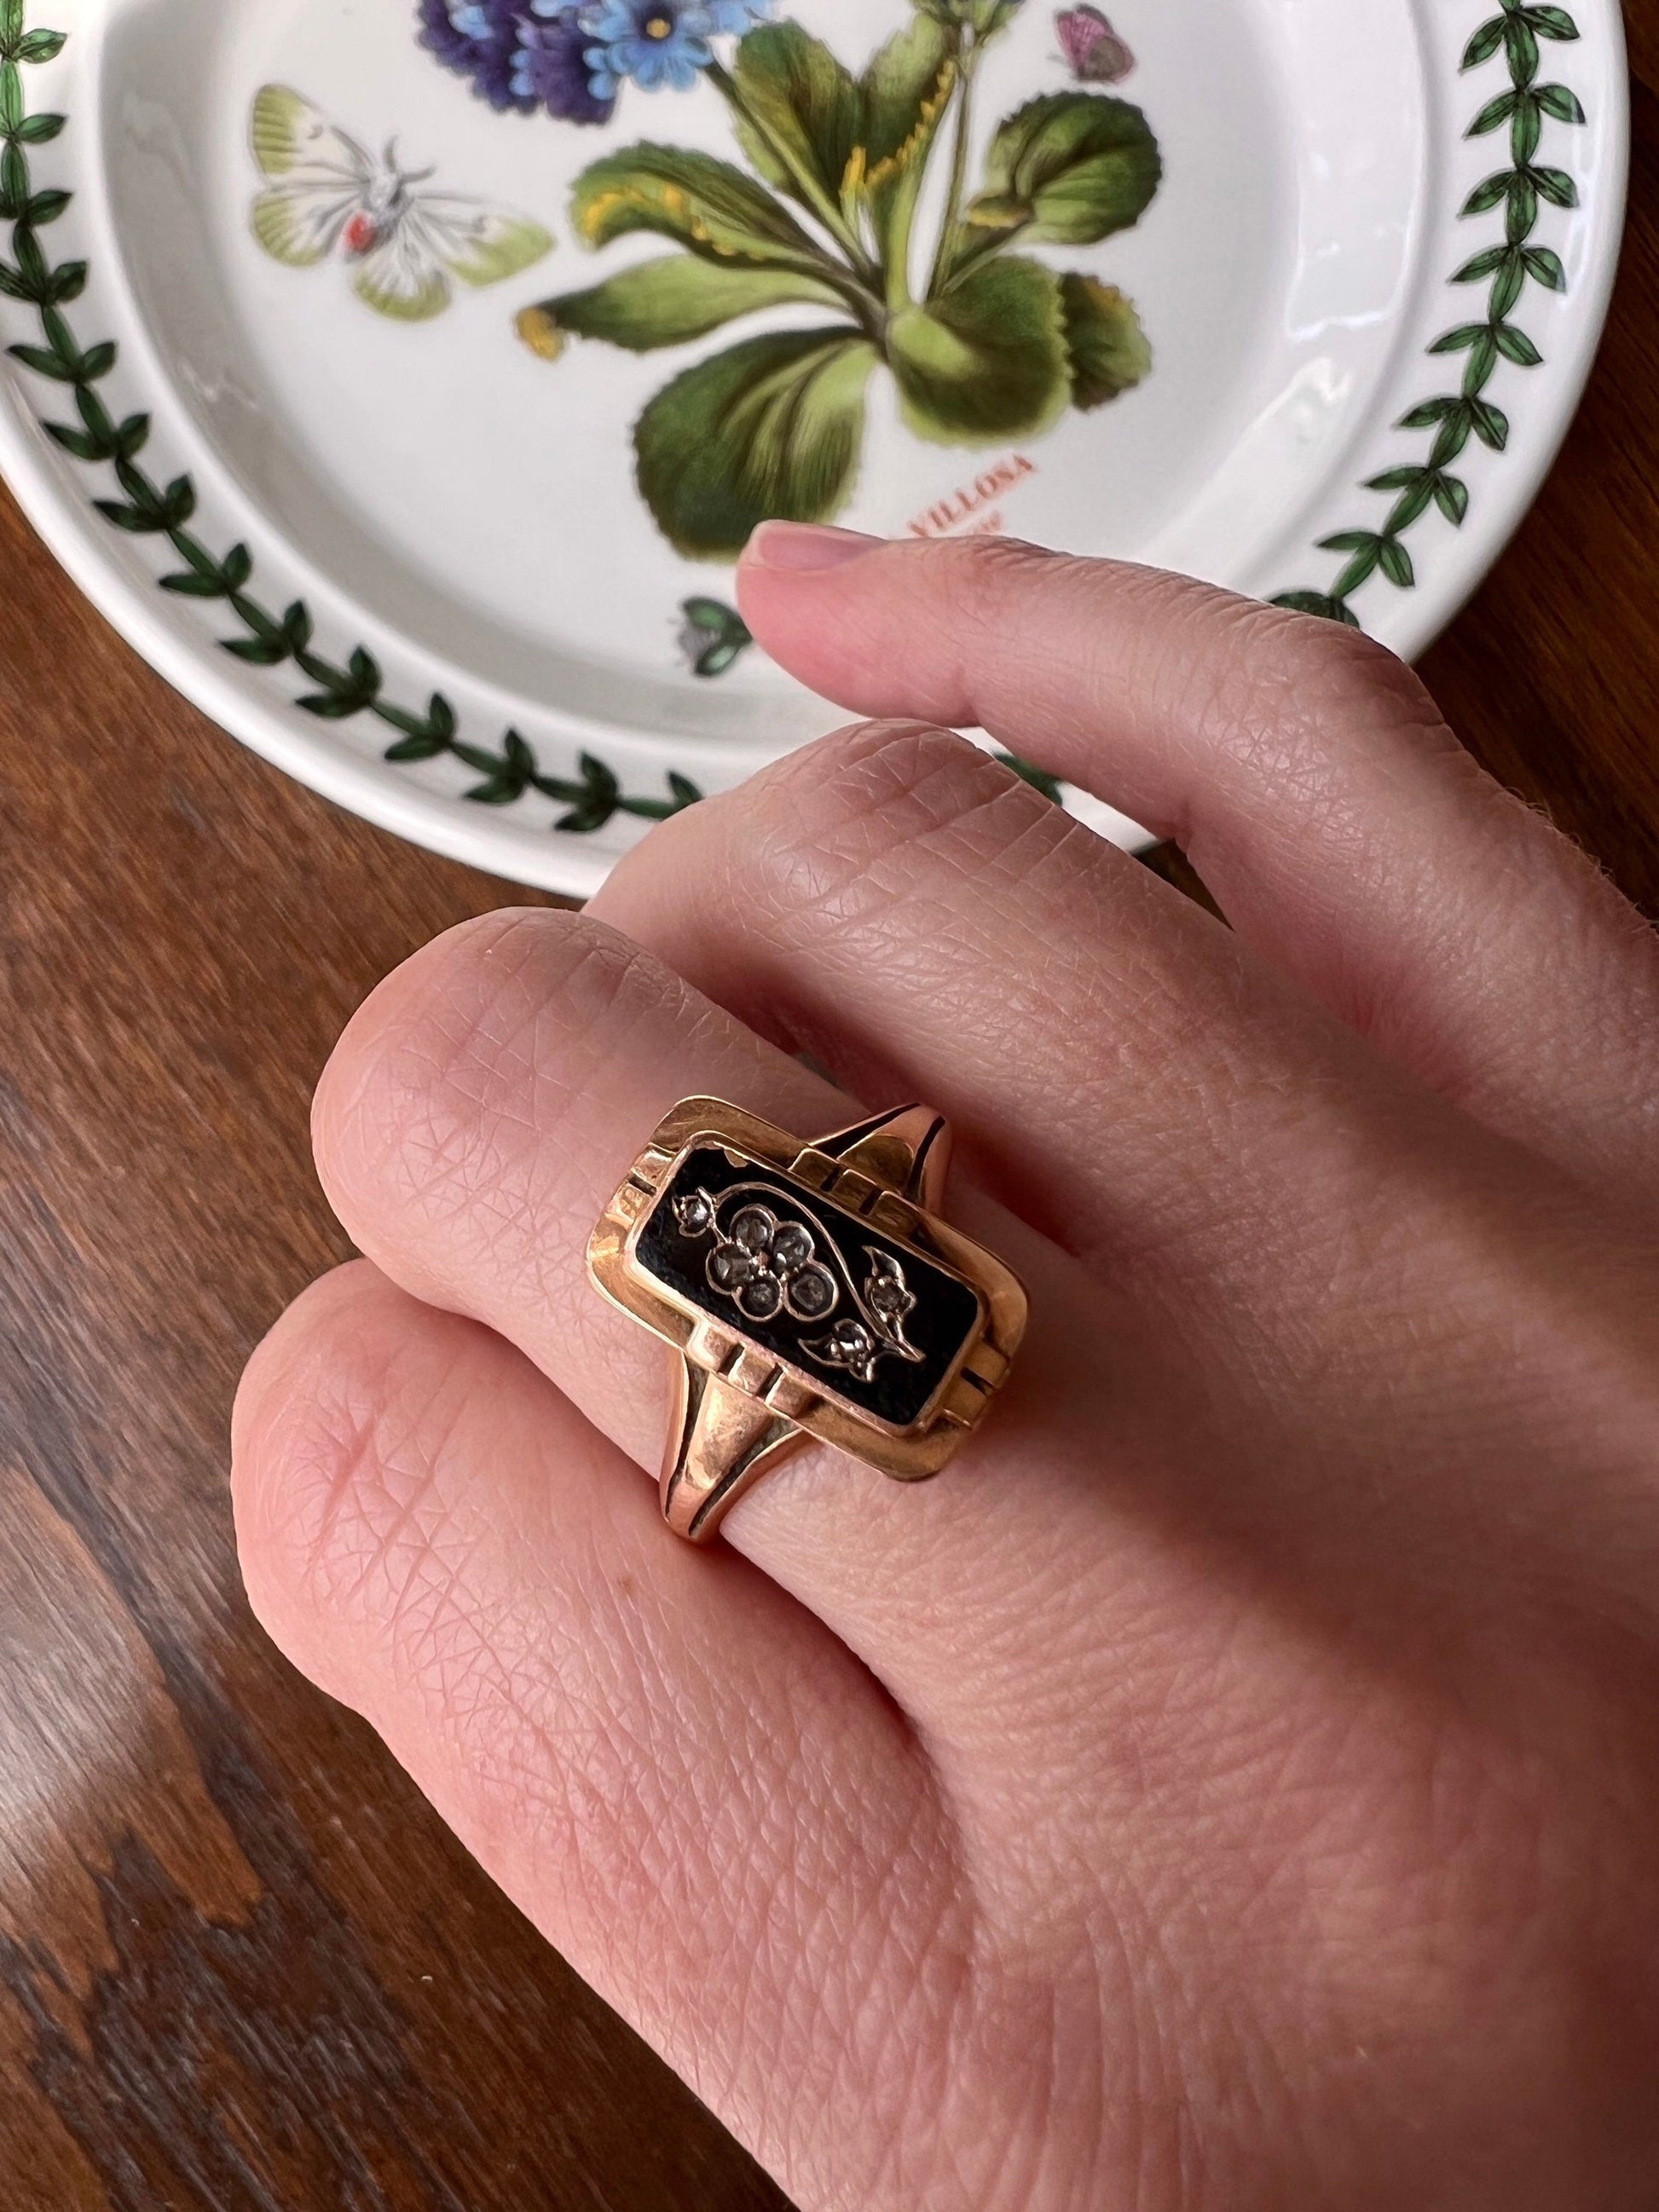 PANSY French Antique Black Enamel Rose Cut DIAMOND Floral 18k Gold Ring MOURNiNG Early Victorian Closed Back Belle Epoque Romantic Gift